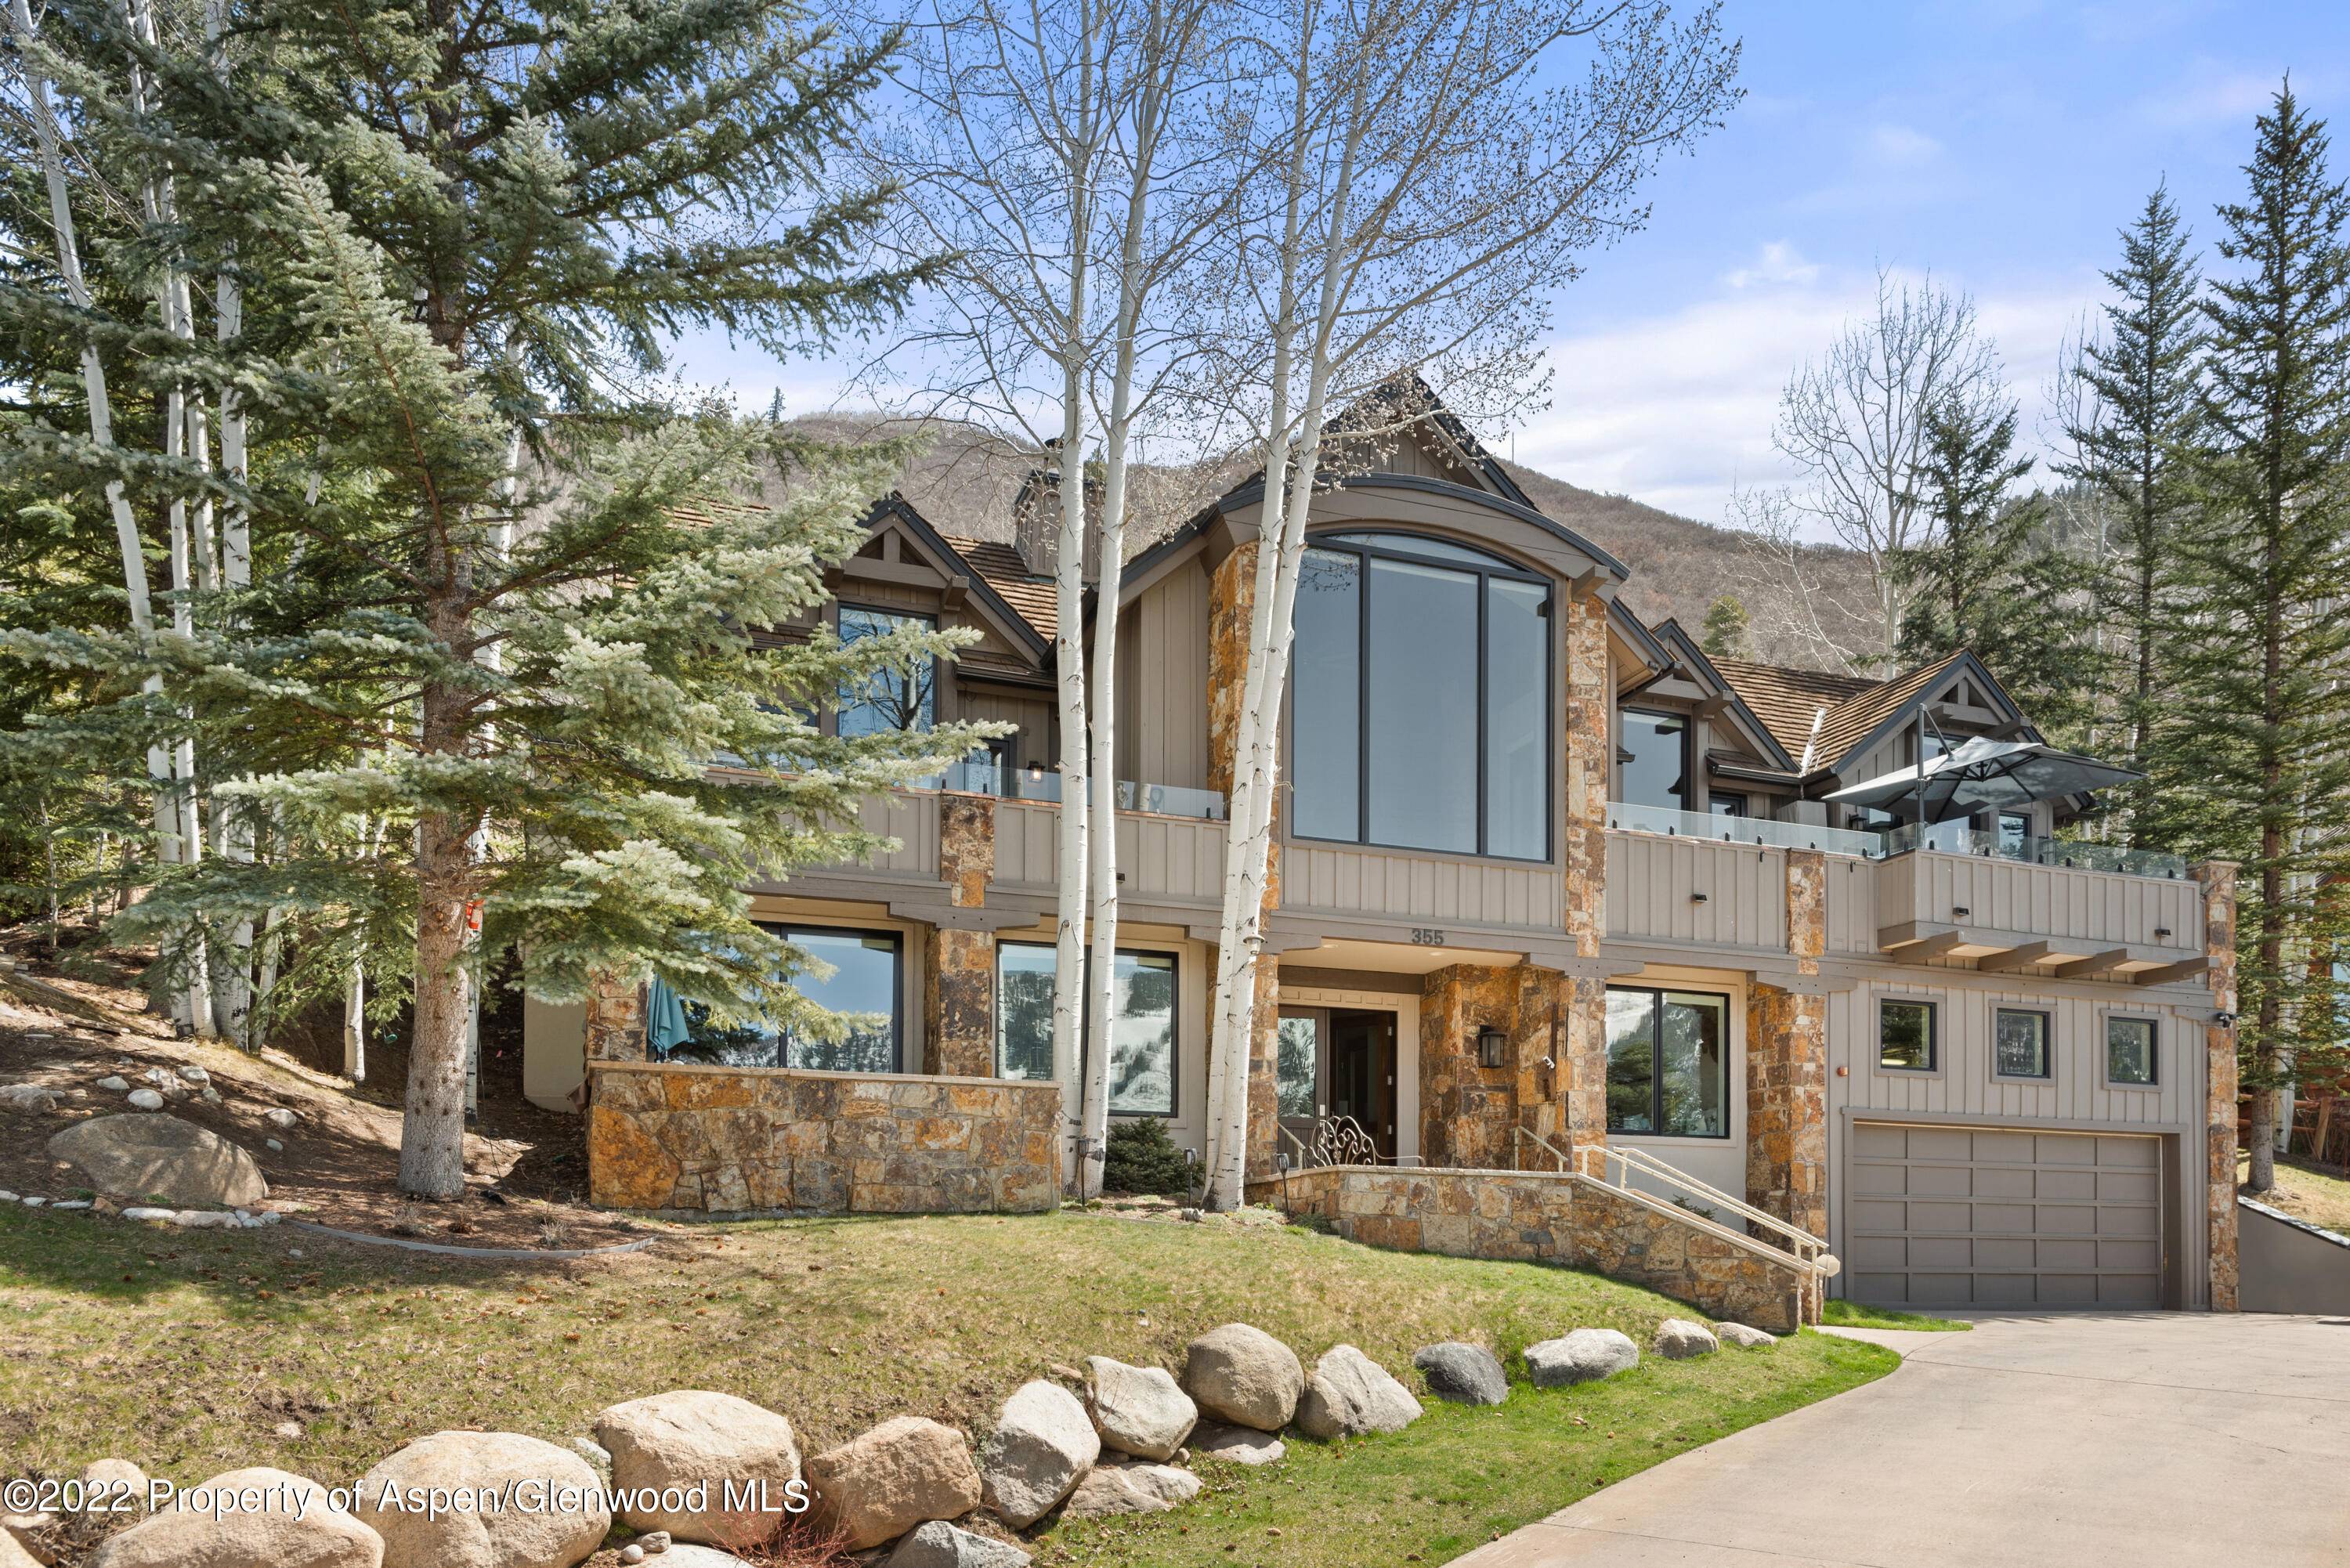 Rarely does a remodeled single family home boasting dramatic Aspen Mountain views become available a mile away from downtown.